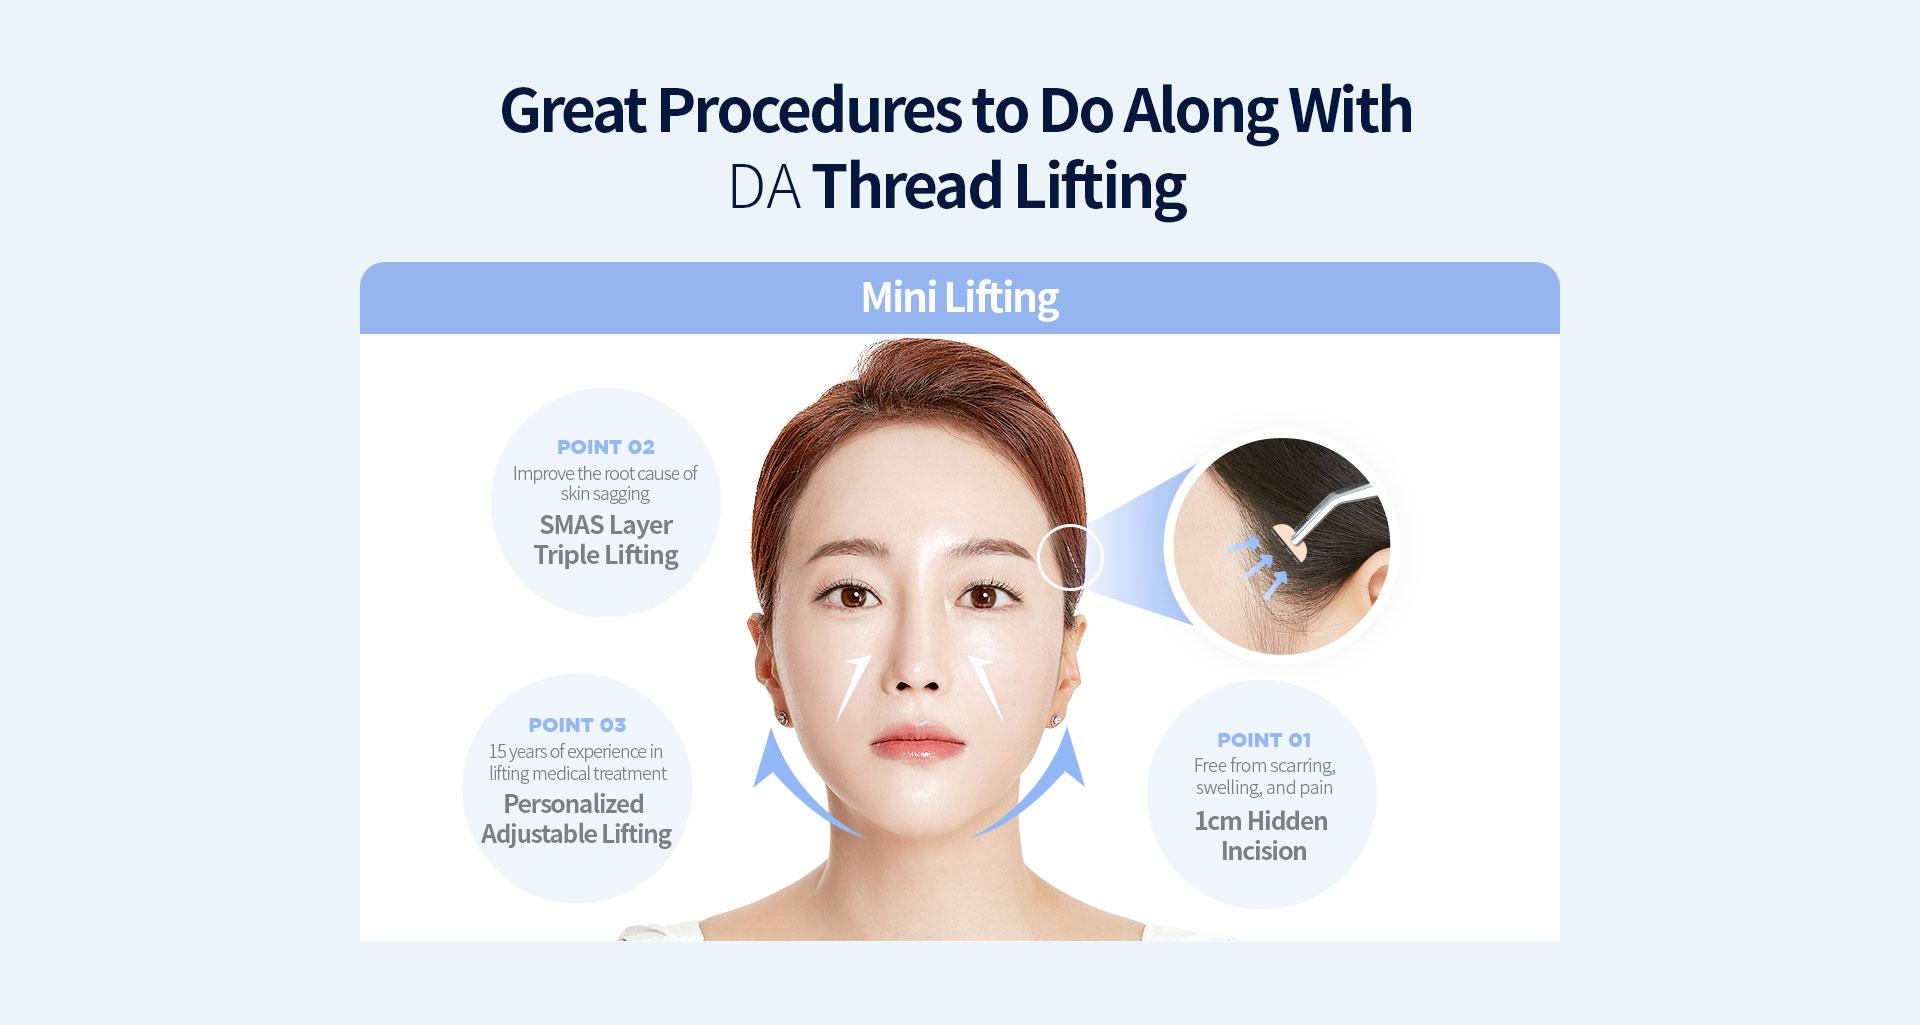 Great Procedures to Do Along With DA Thread Lifting